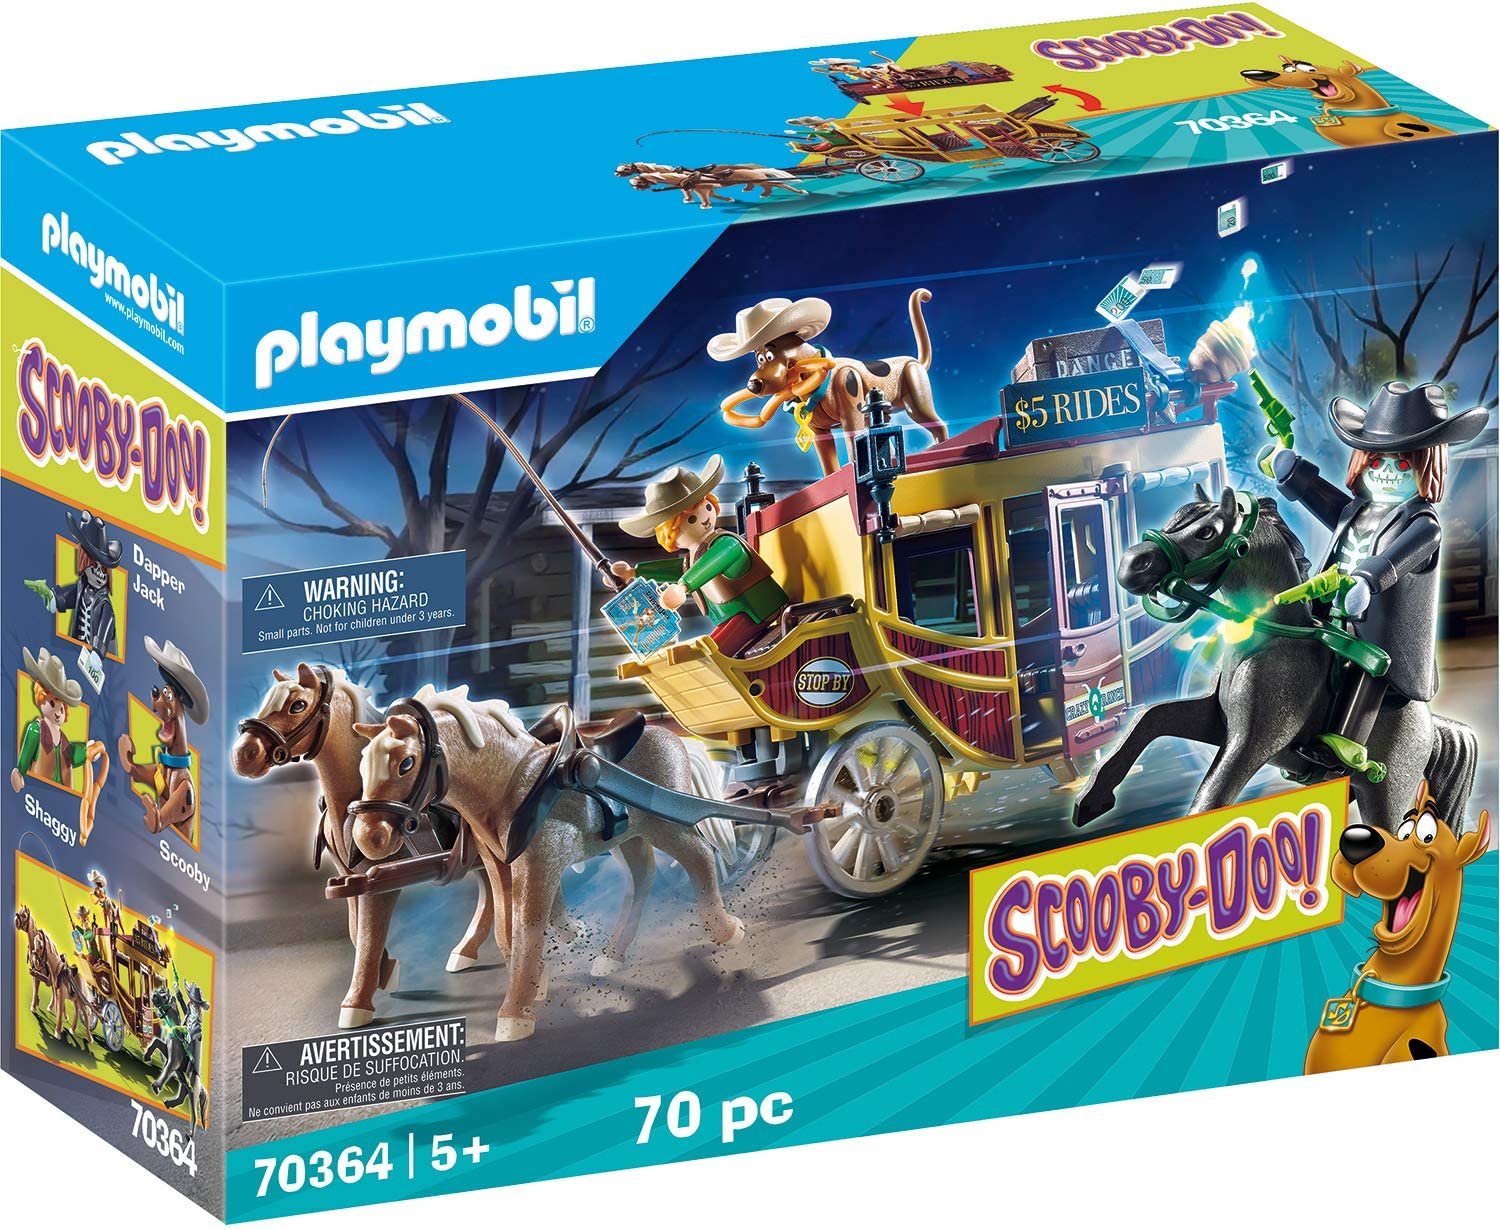 PLAYMOBIL 70364 Scooby-Doo Adventure in the Wild West from 5 Years and Abov